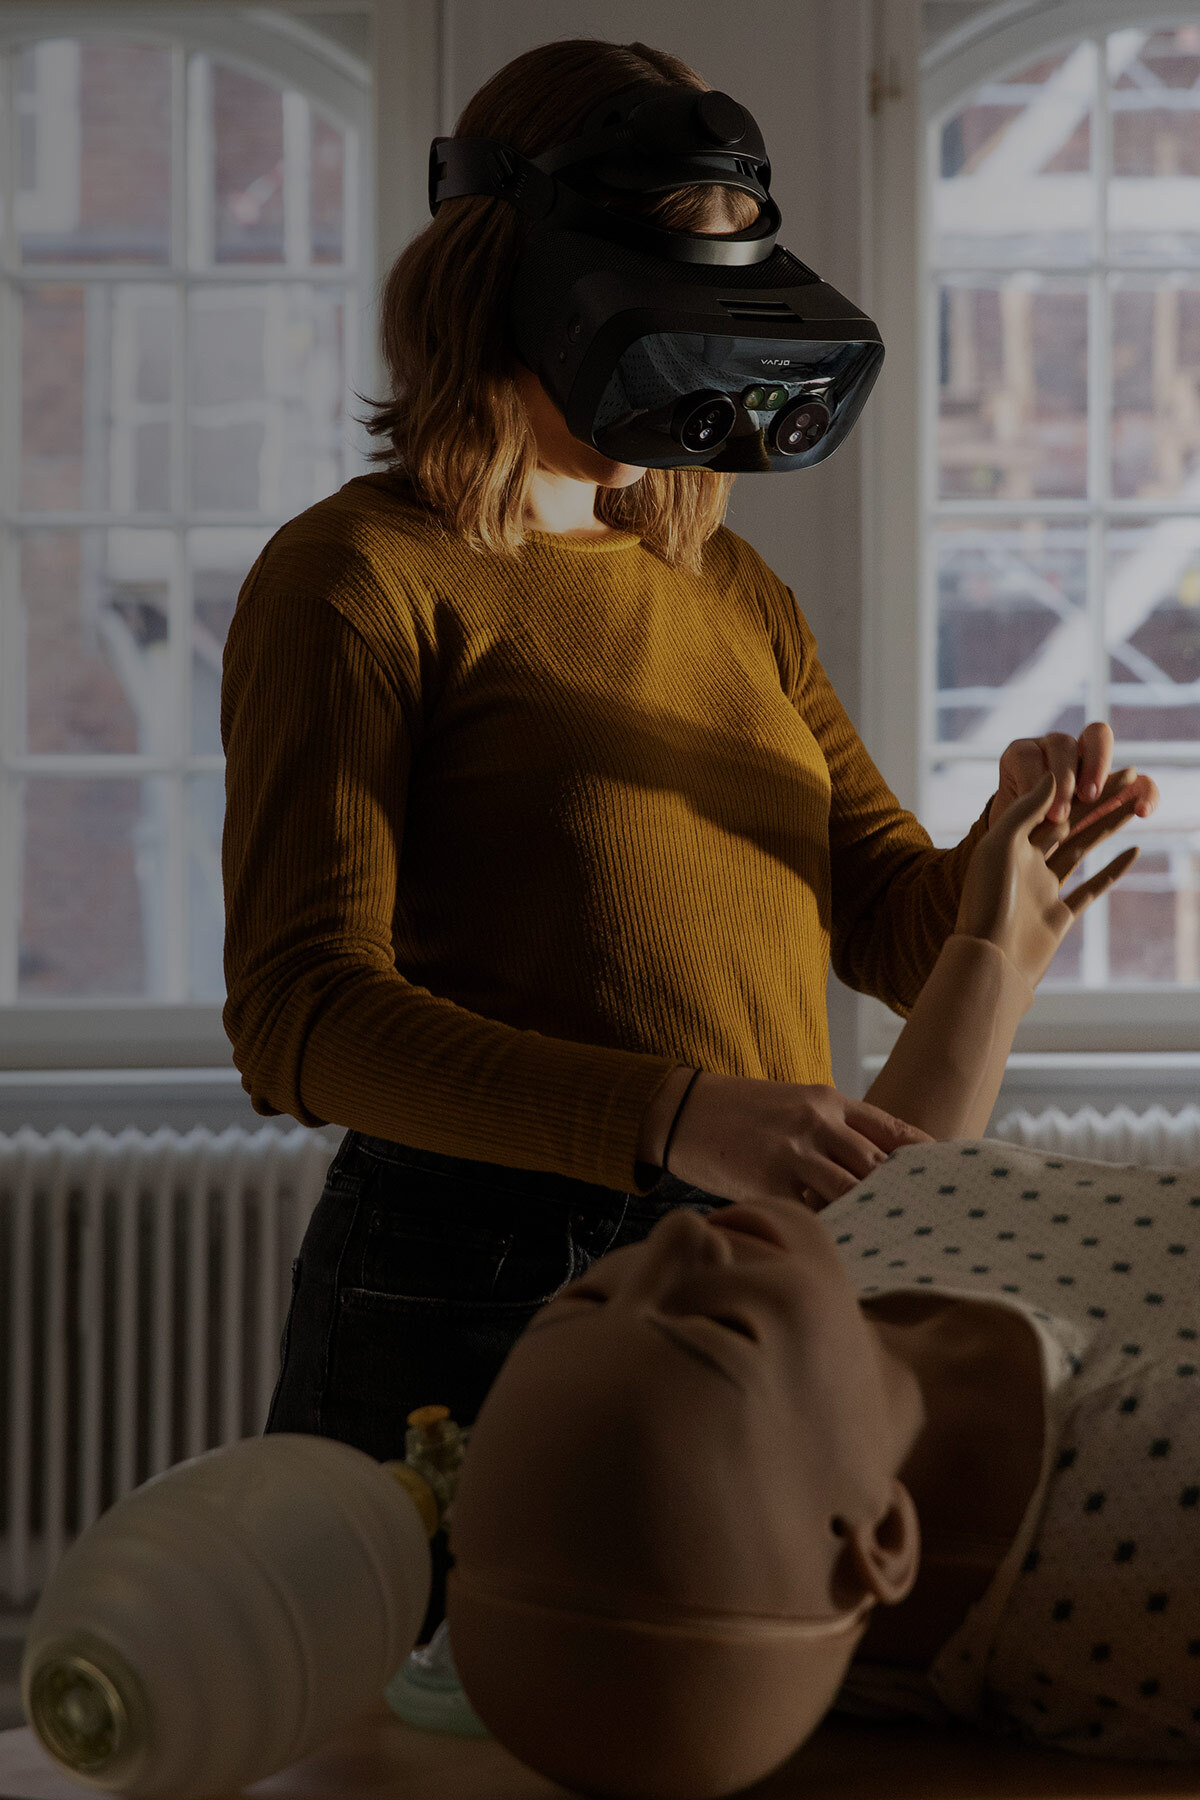 Medical simulation in mixed reality